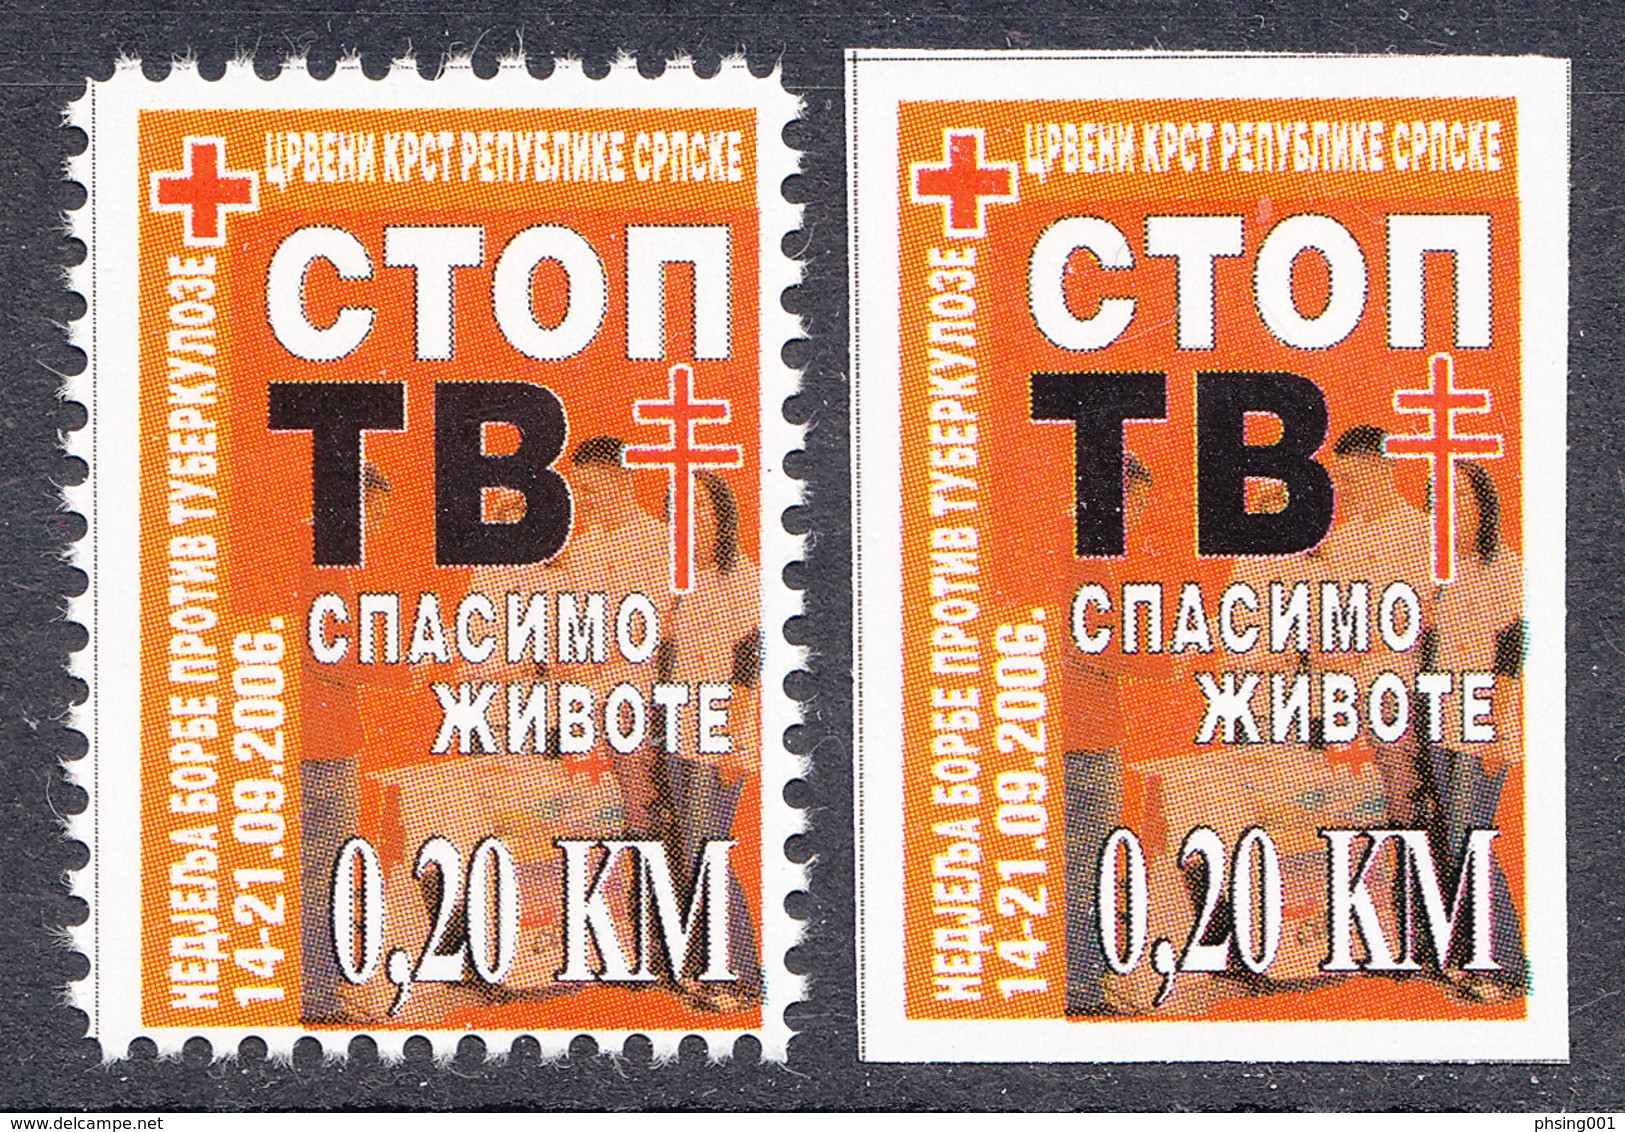 Bosnia Serbia 2006 TBC, Red Cross Rotes Kreuz Croix Rouge, Tax Charity Surcharge, Perforated + Imperforated Stamp MNH - Bosnia And Herzegovina